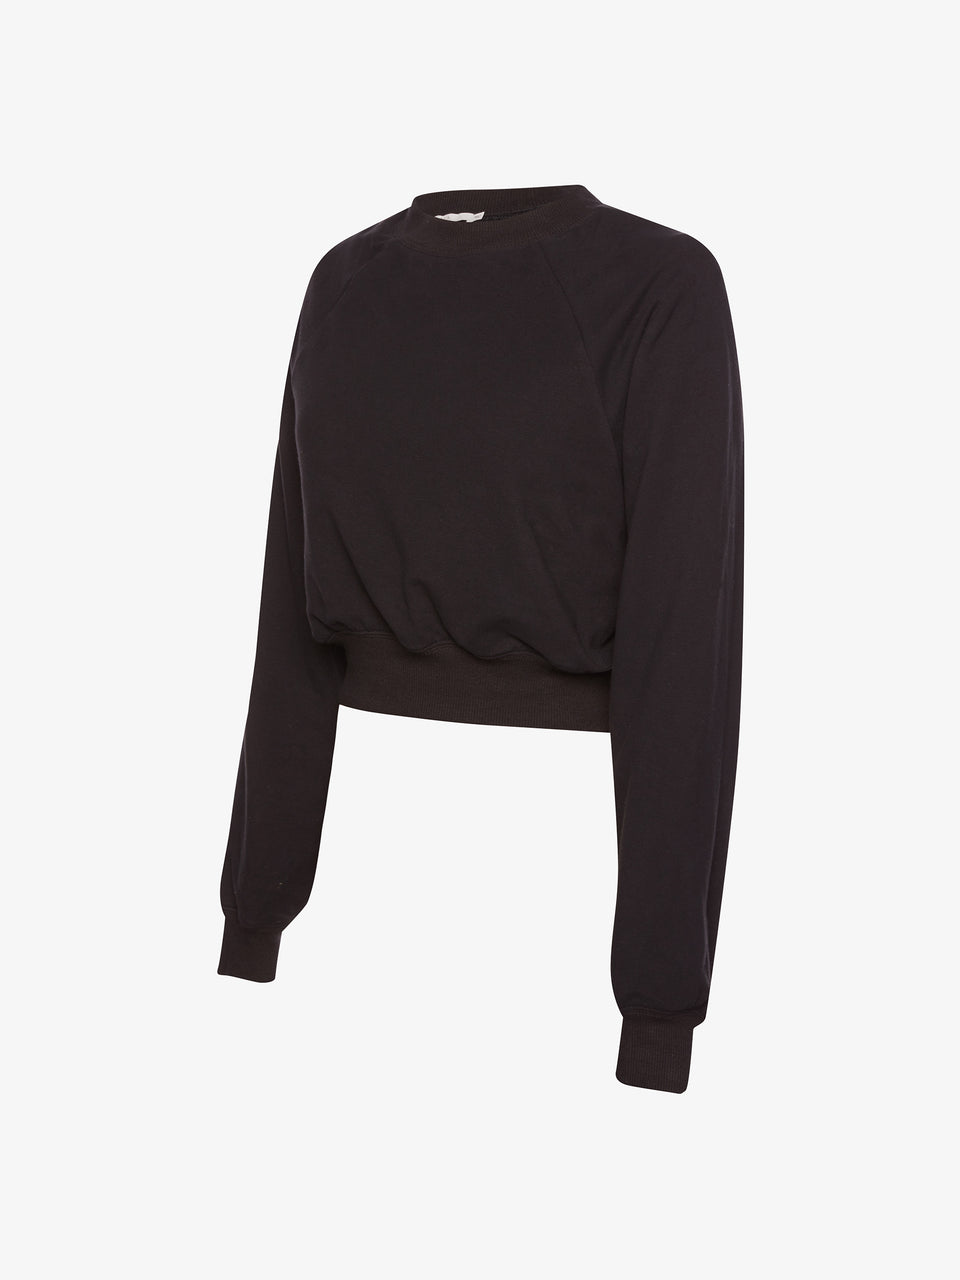 NIA_Krissy_Cropped_Pullover_Black